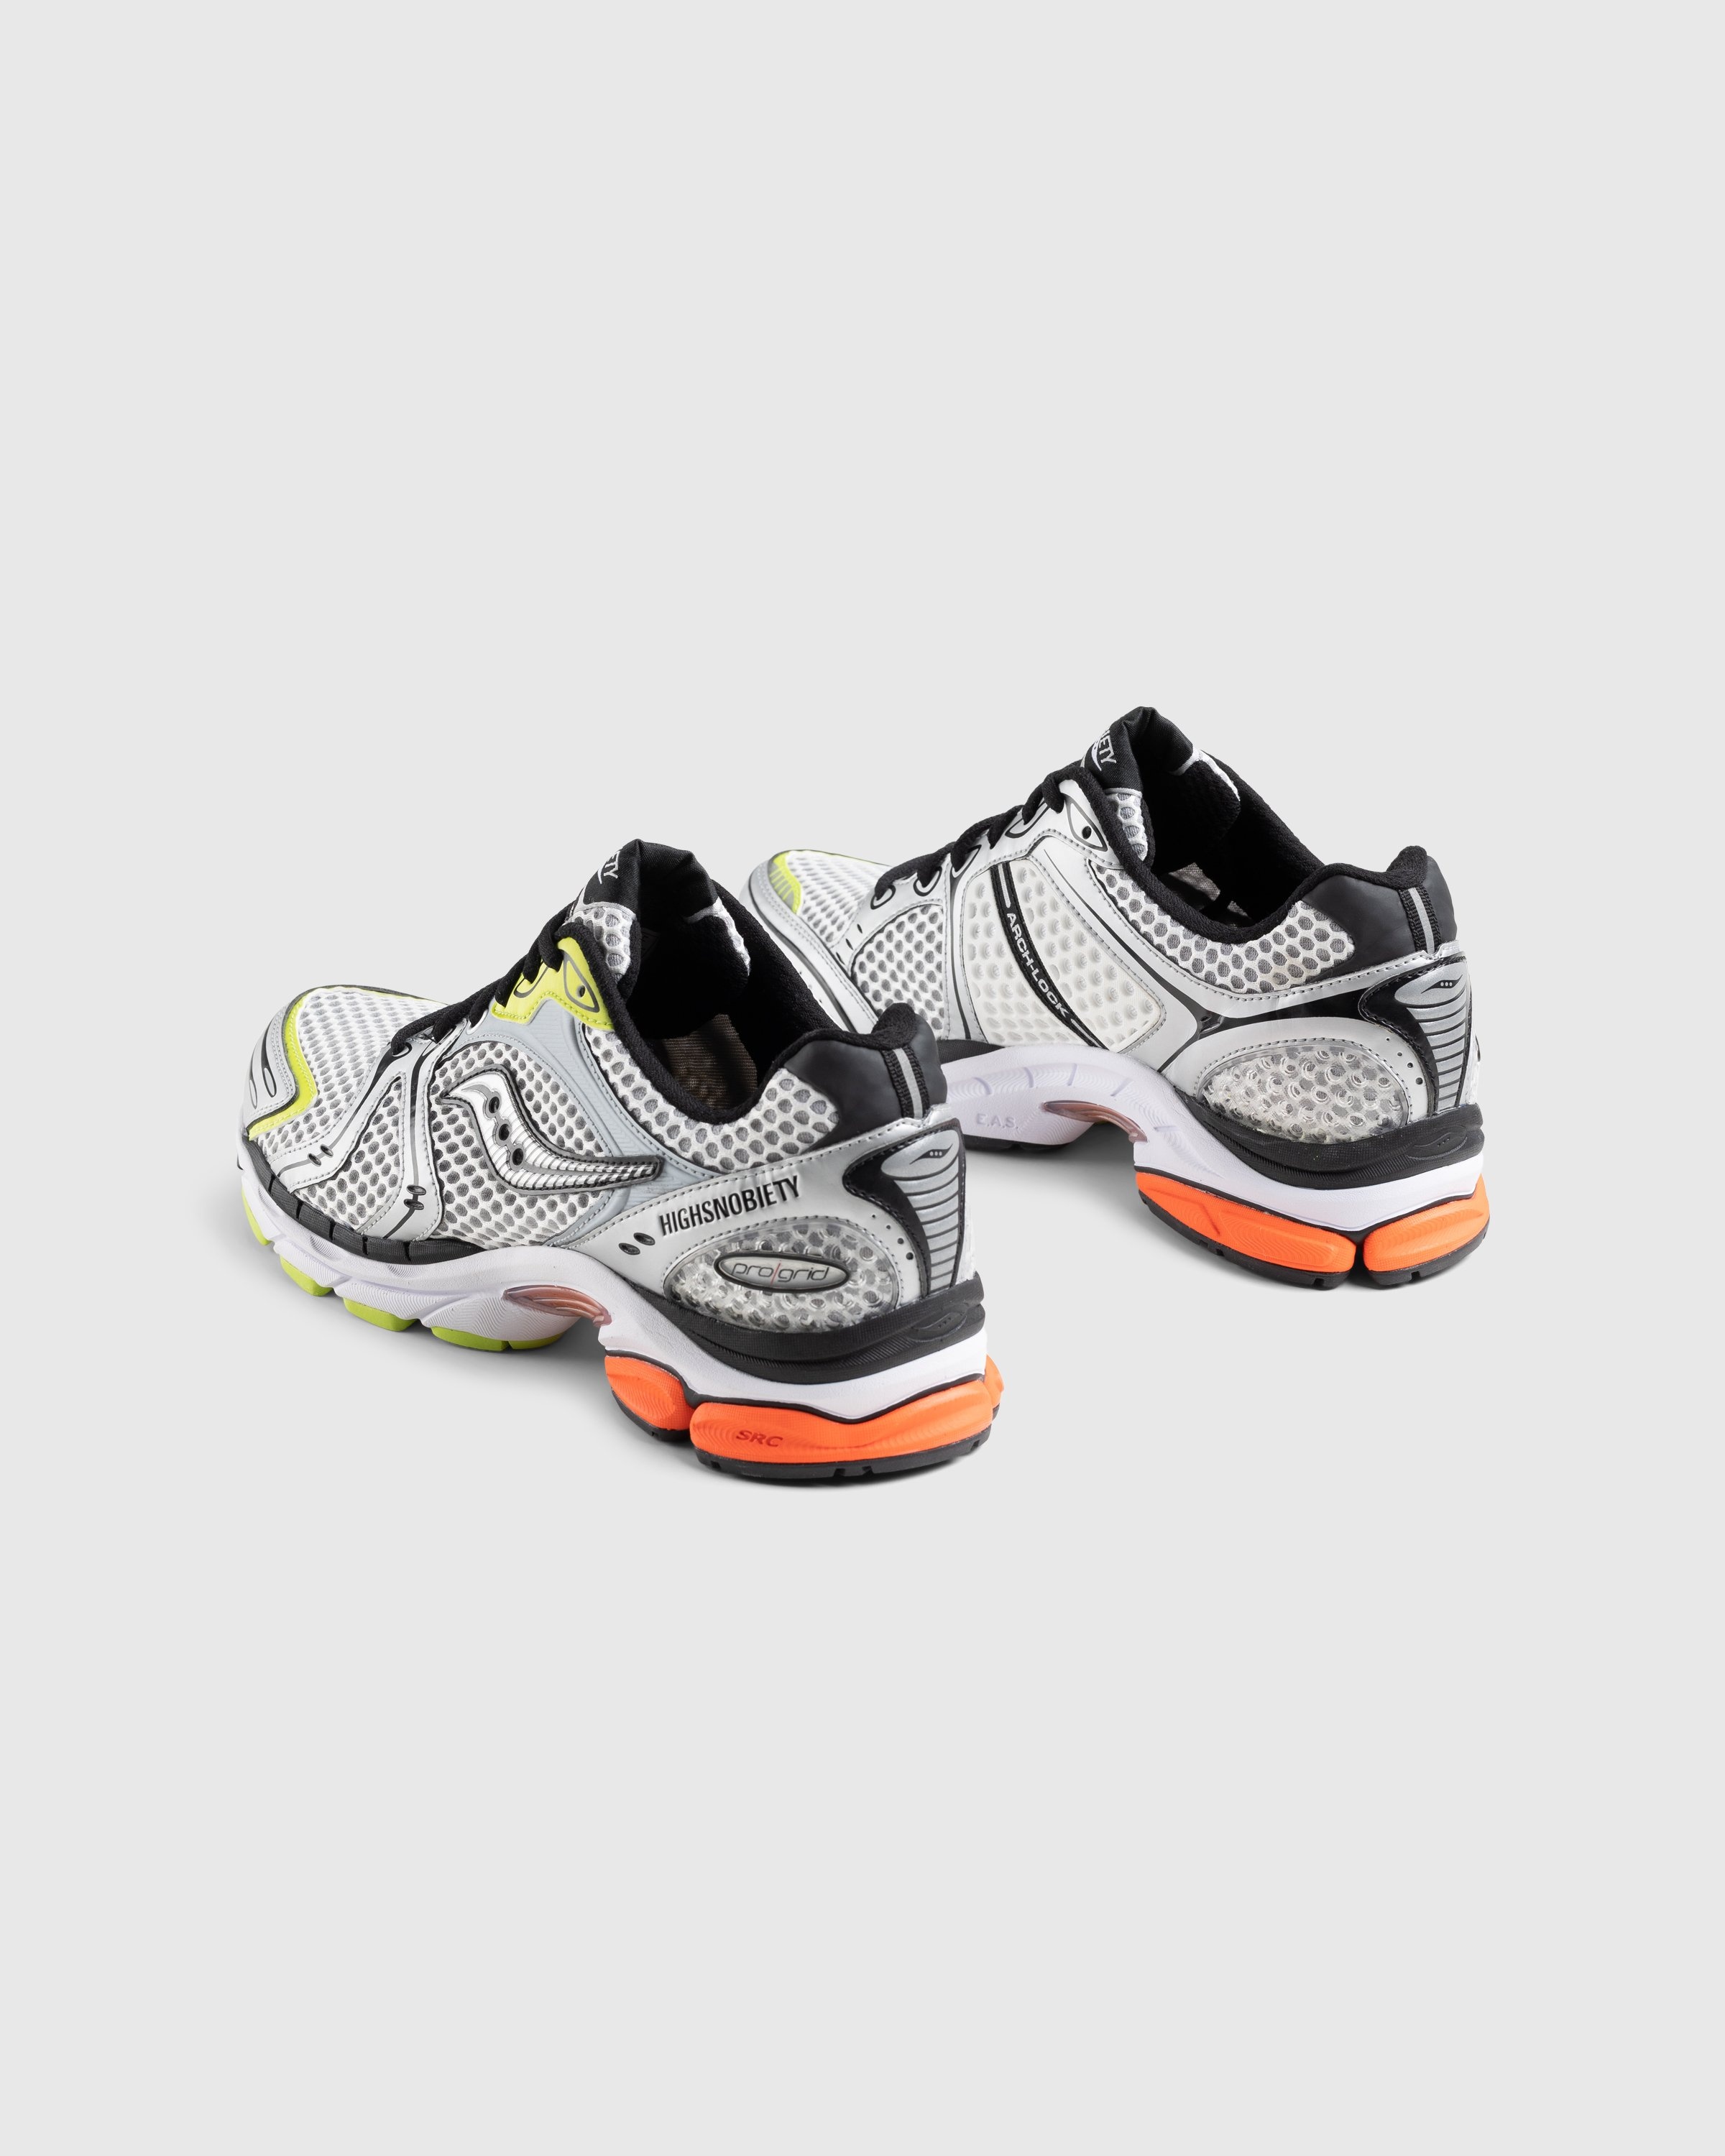 Saucony x Highsnobiety – Pro Grid Triumph 4 Silver/Multi - Sneakers - Silver - Image 4